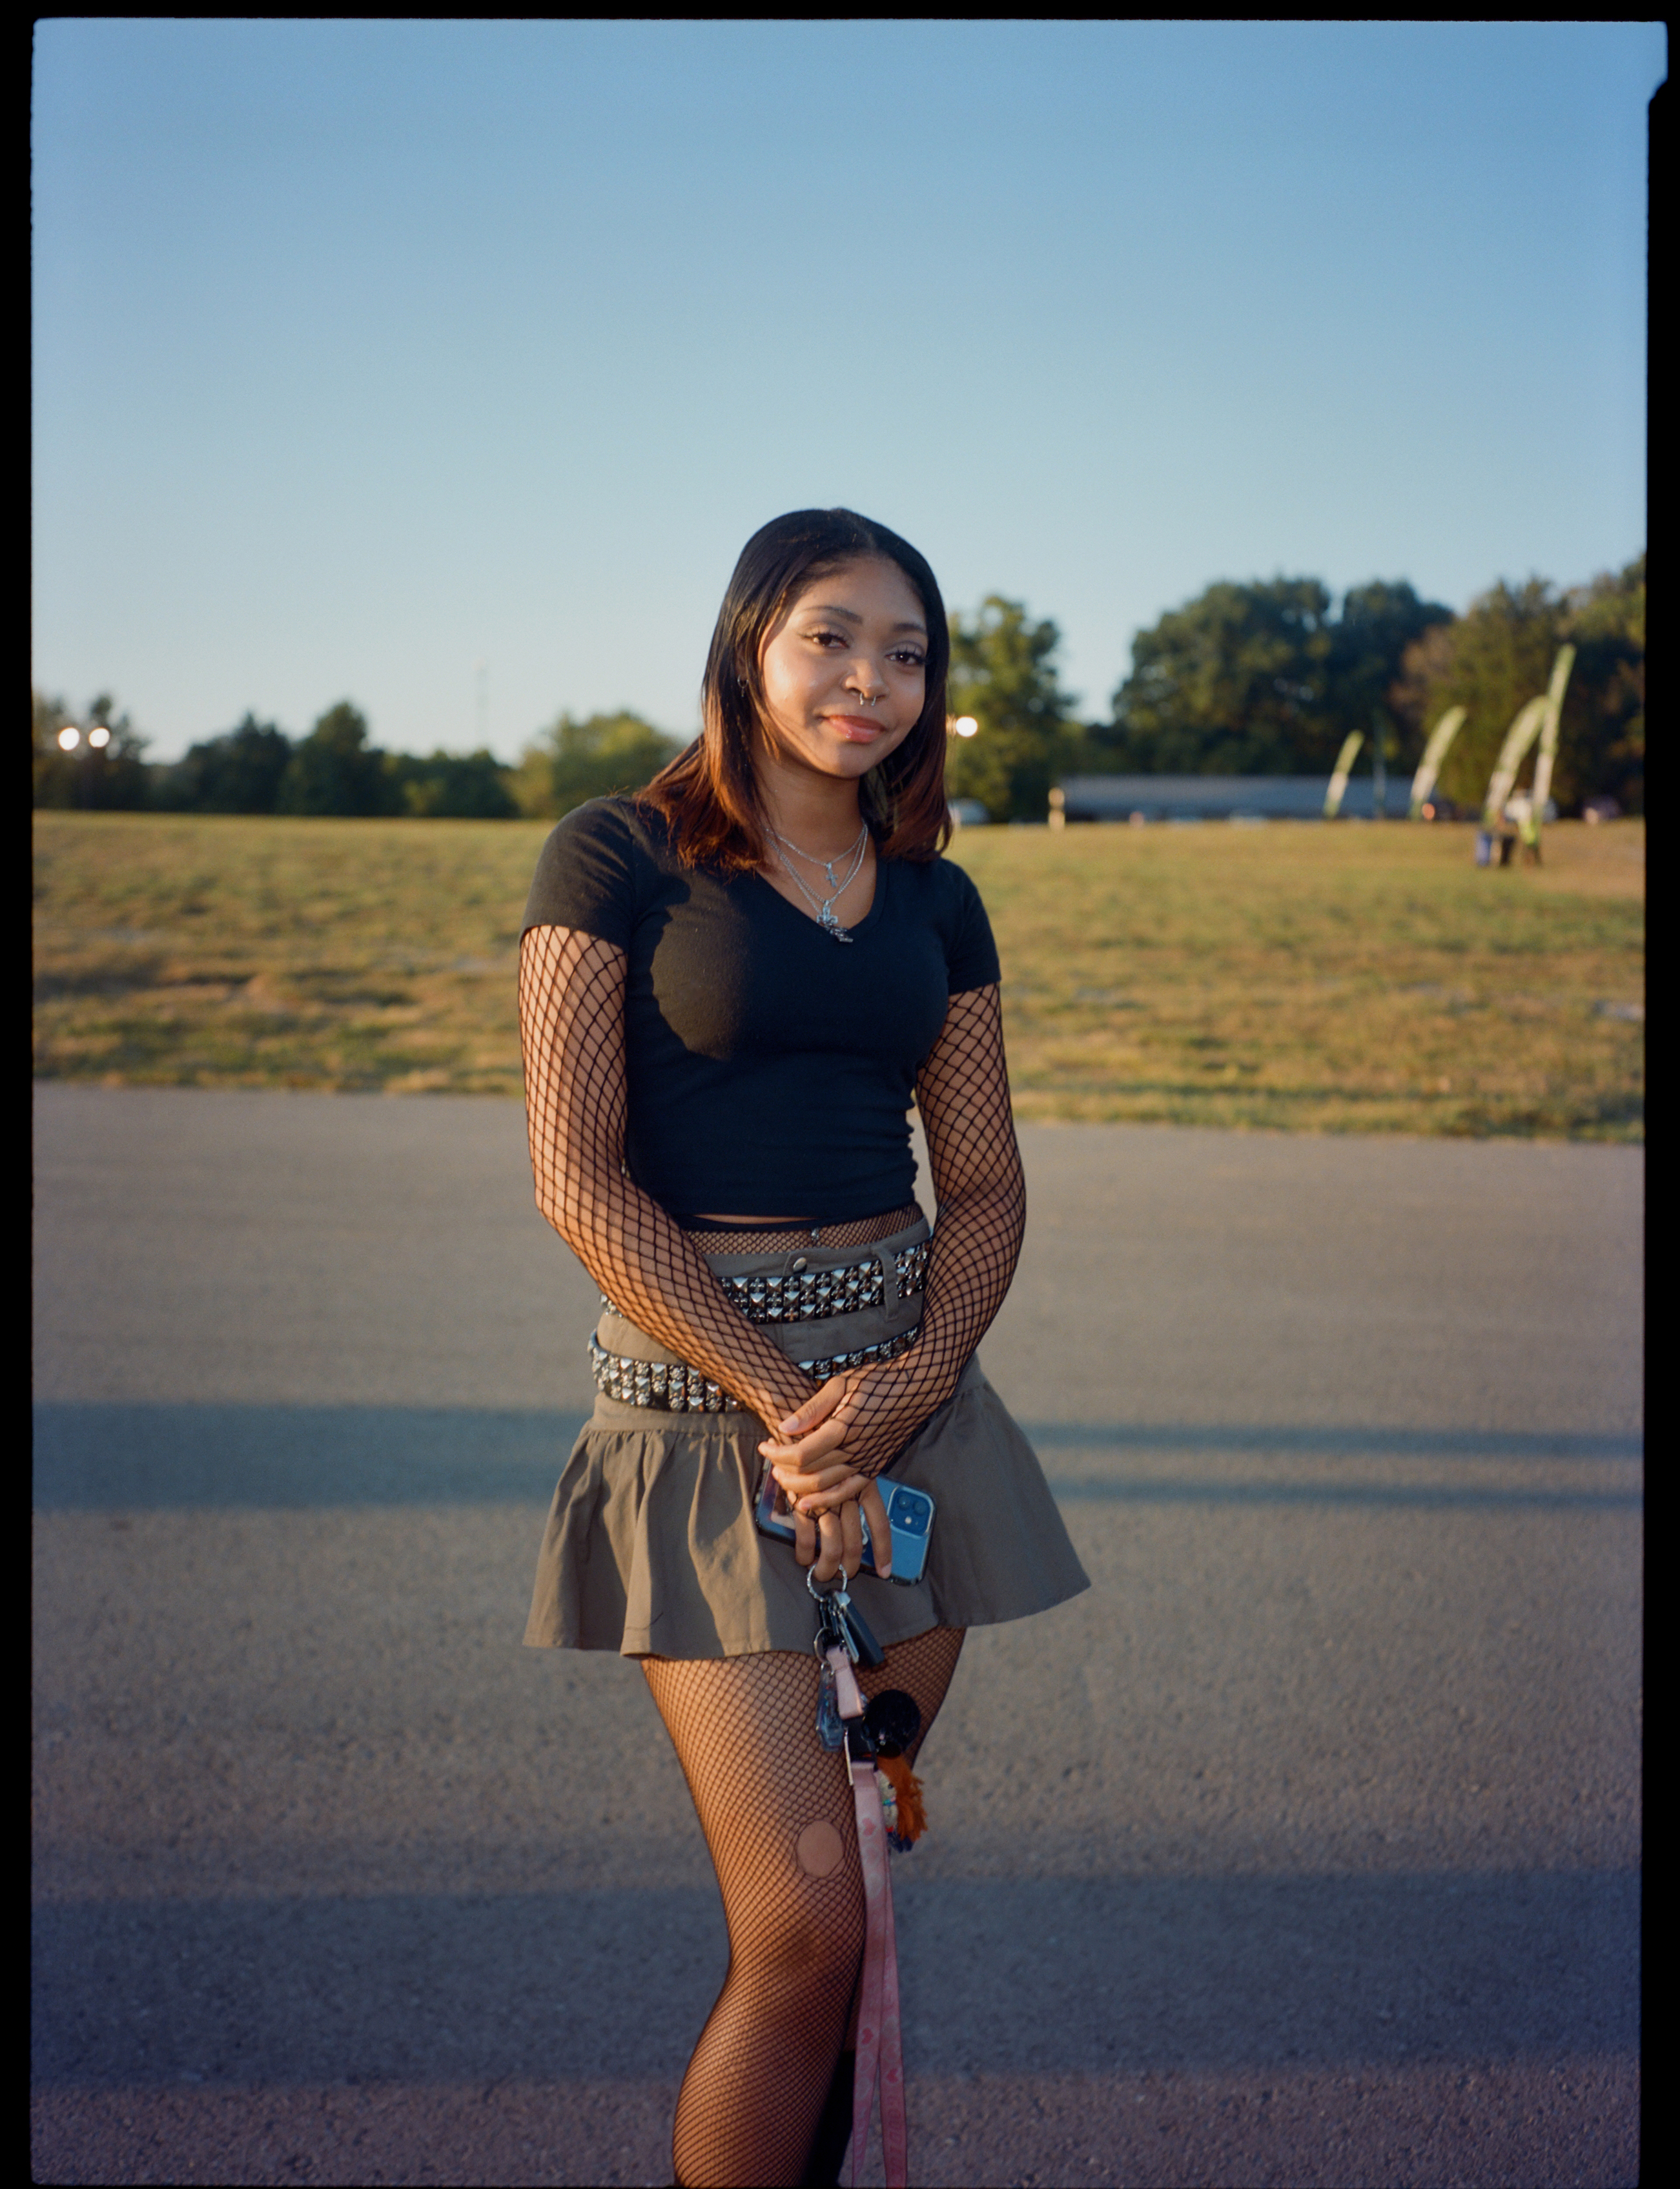 a lana del rey fan in tennessee wears a black t-shirt with fishnet sleeves, and a khaki peplum skirt with studded belt. she has shoulder length hair and is smiling